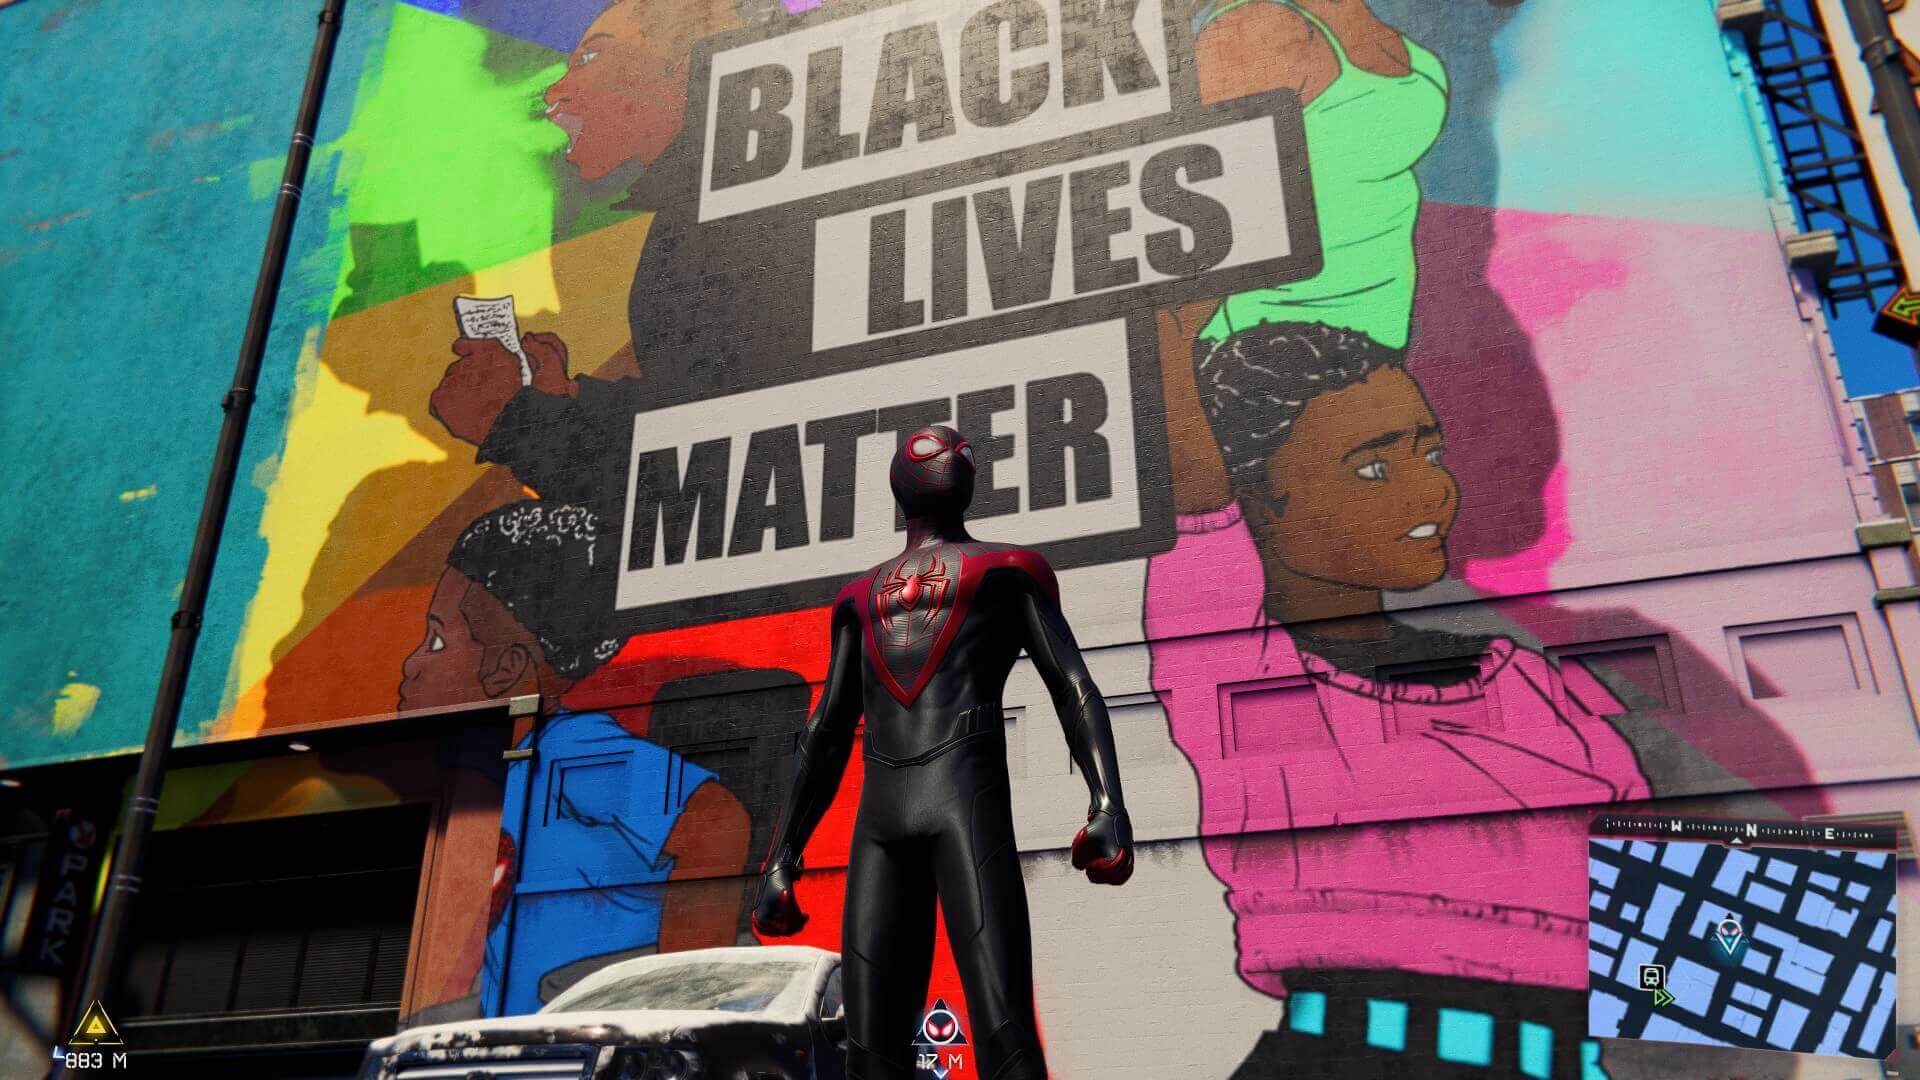 Análise: Marvel's Spider-Man: Miles Morales (PS4/PS5): expandindo